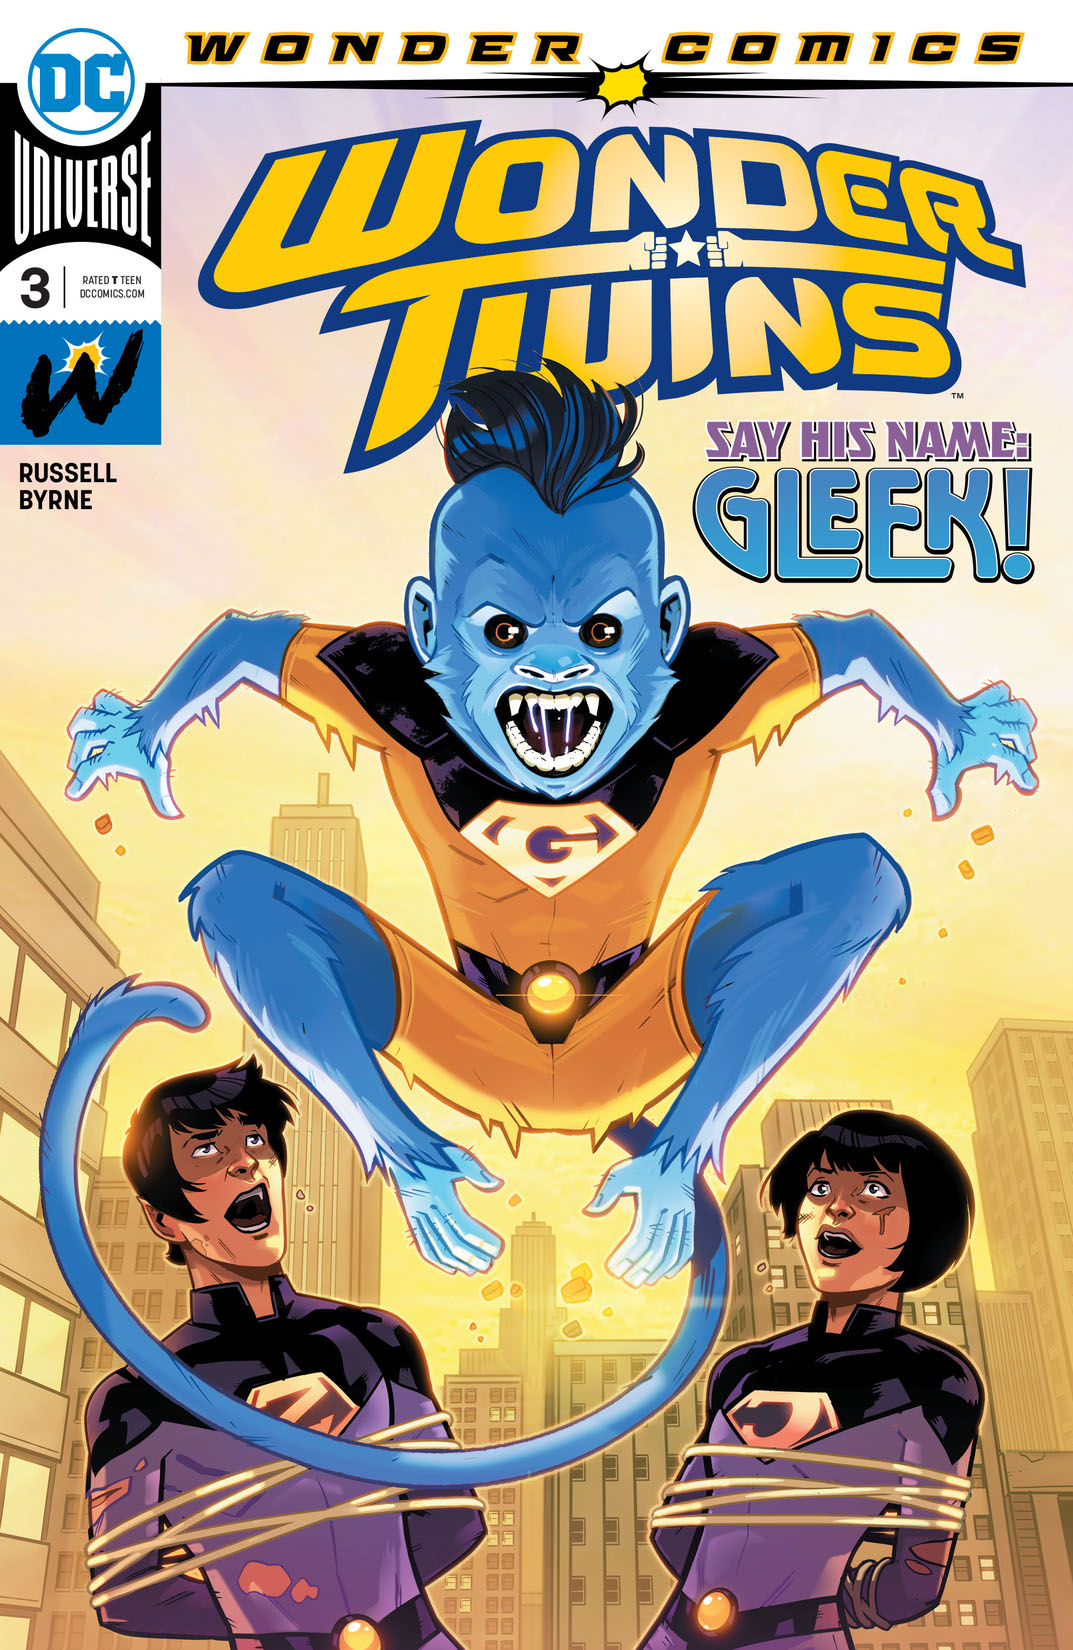 Wonder Twins #3 preview images